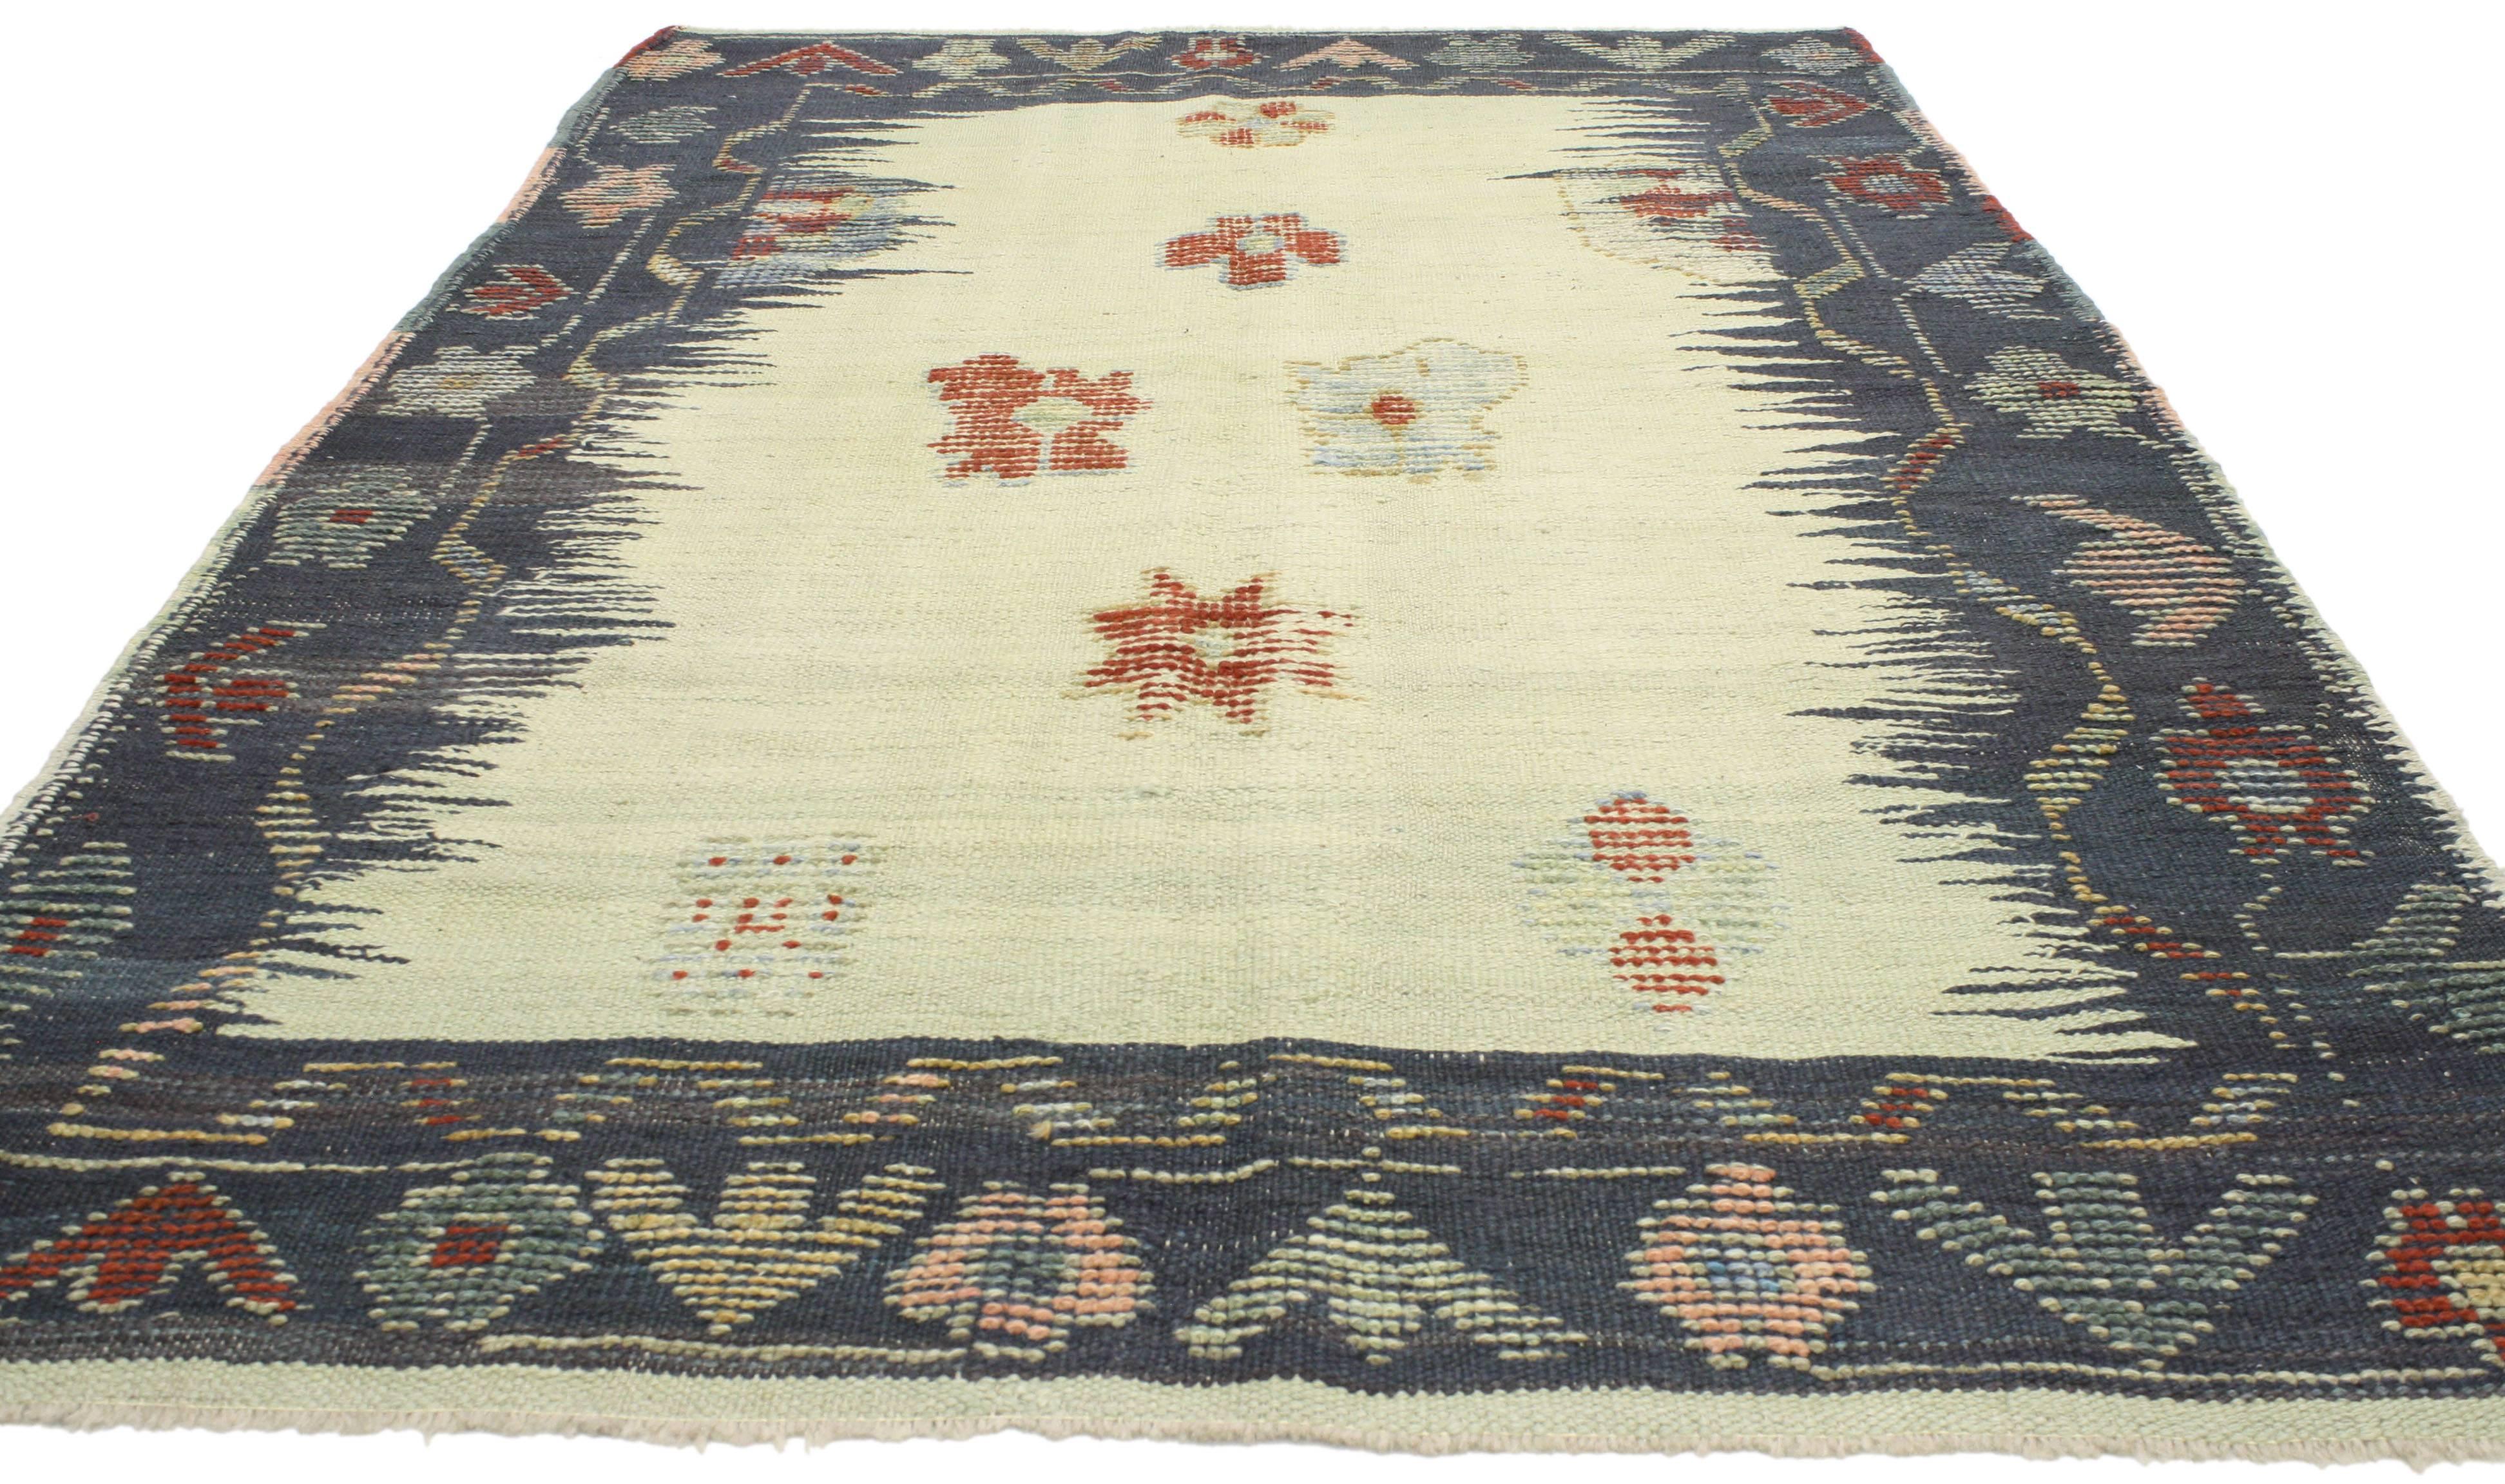 Hand-Woven Turkish Kilim Rug with Large-Scale Geometric Pattern and Nomadic Tribal Style